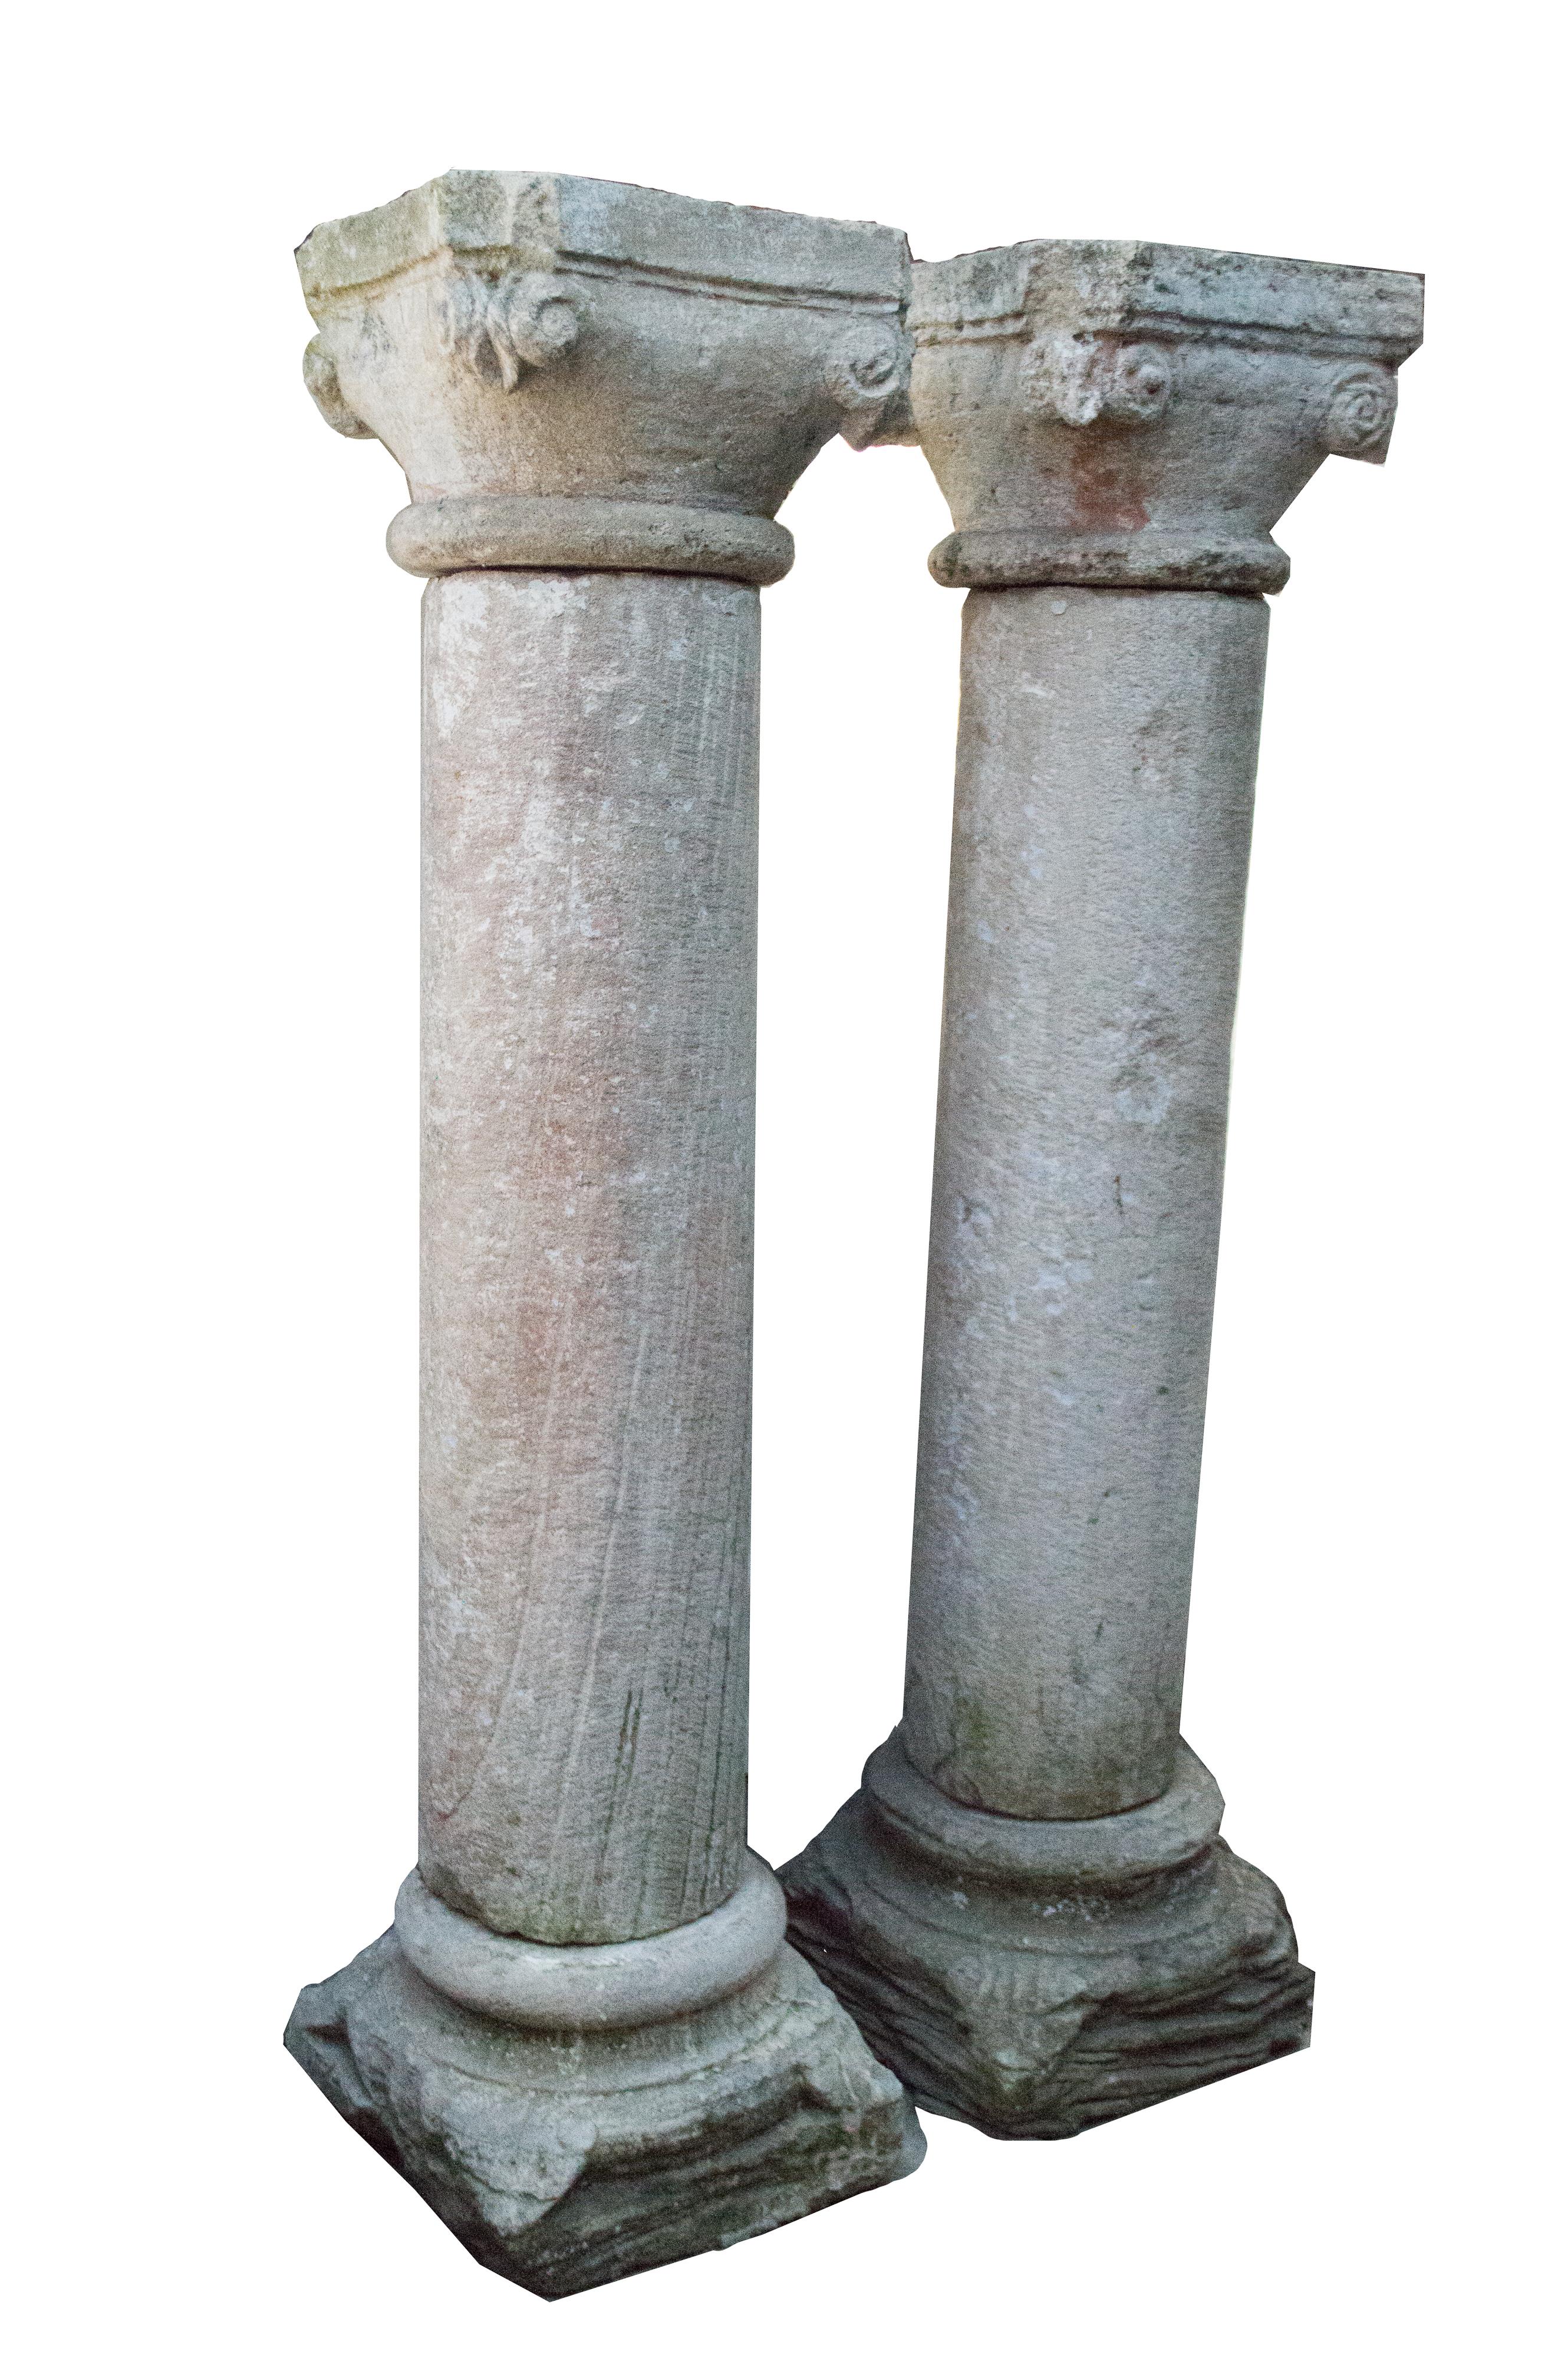 These wonderful pieces, with a dreamly patina and a sincretism of continents on the capitels, are a clear example of the European influence in India. They possibly comes from some of the European bastions that were along its coast: Goa, Diu, Damán,